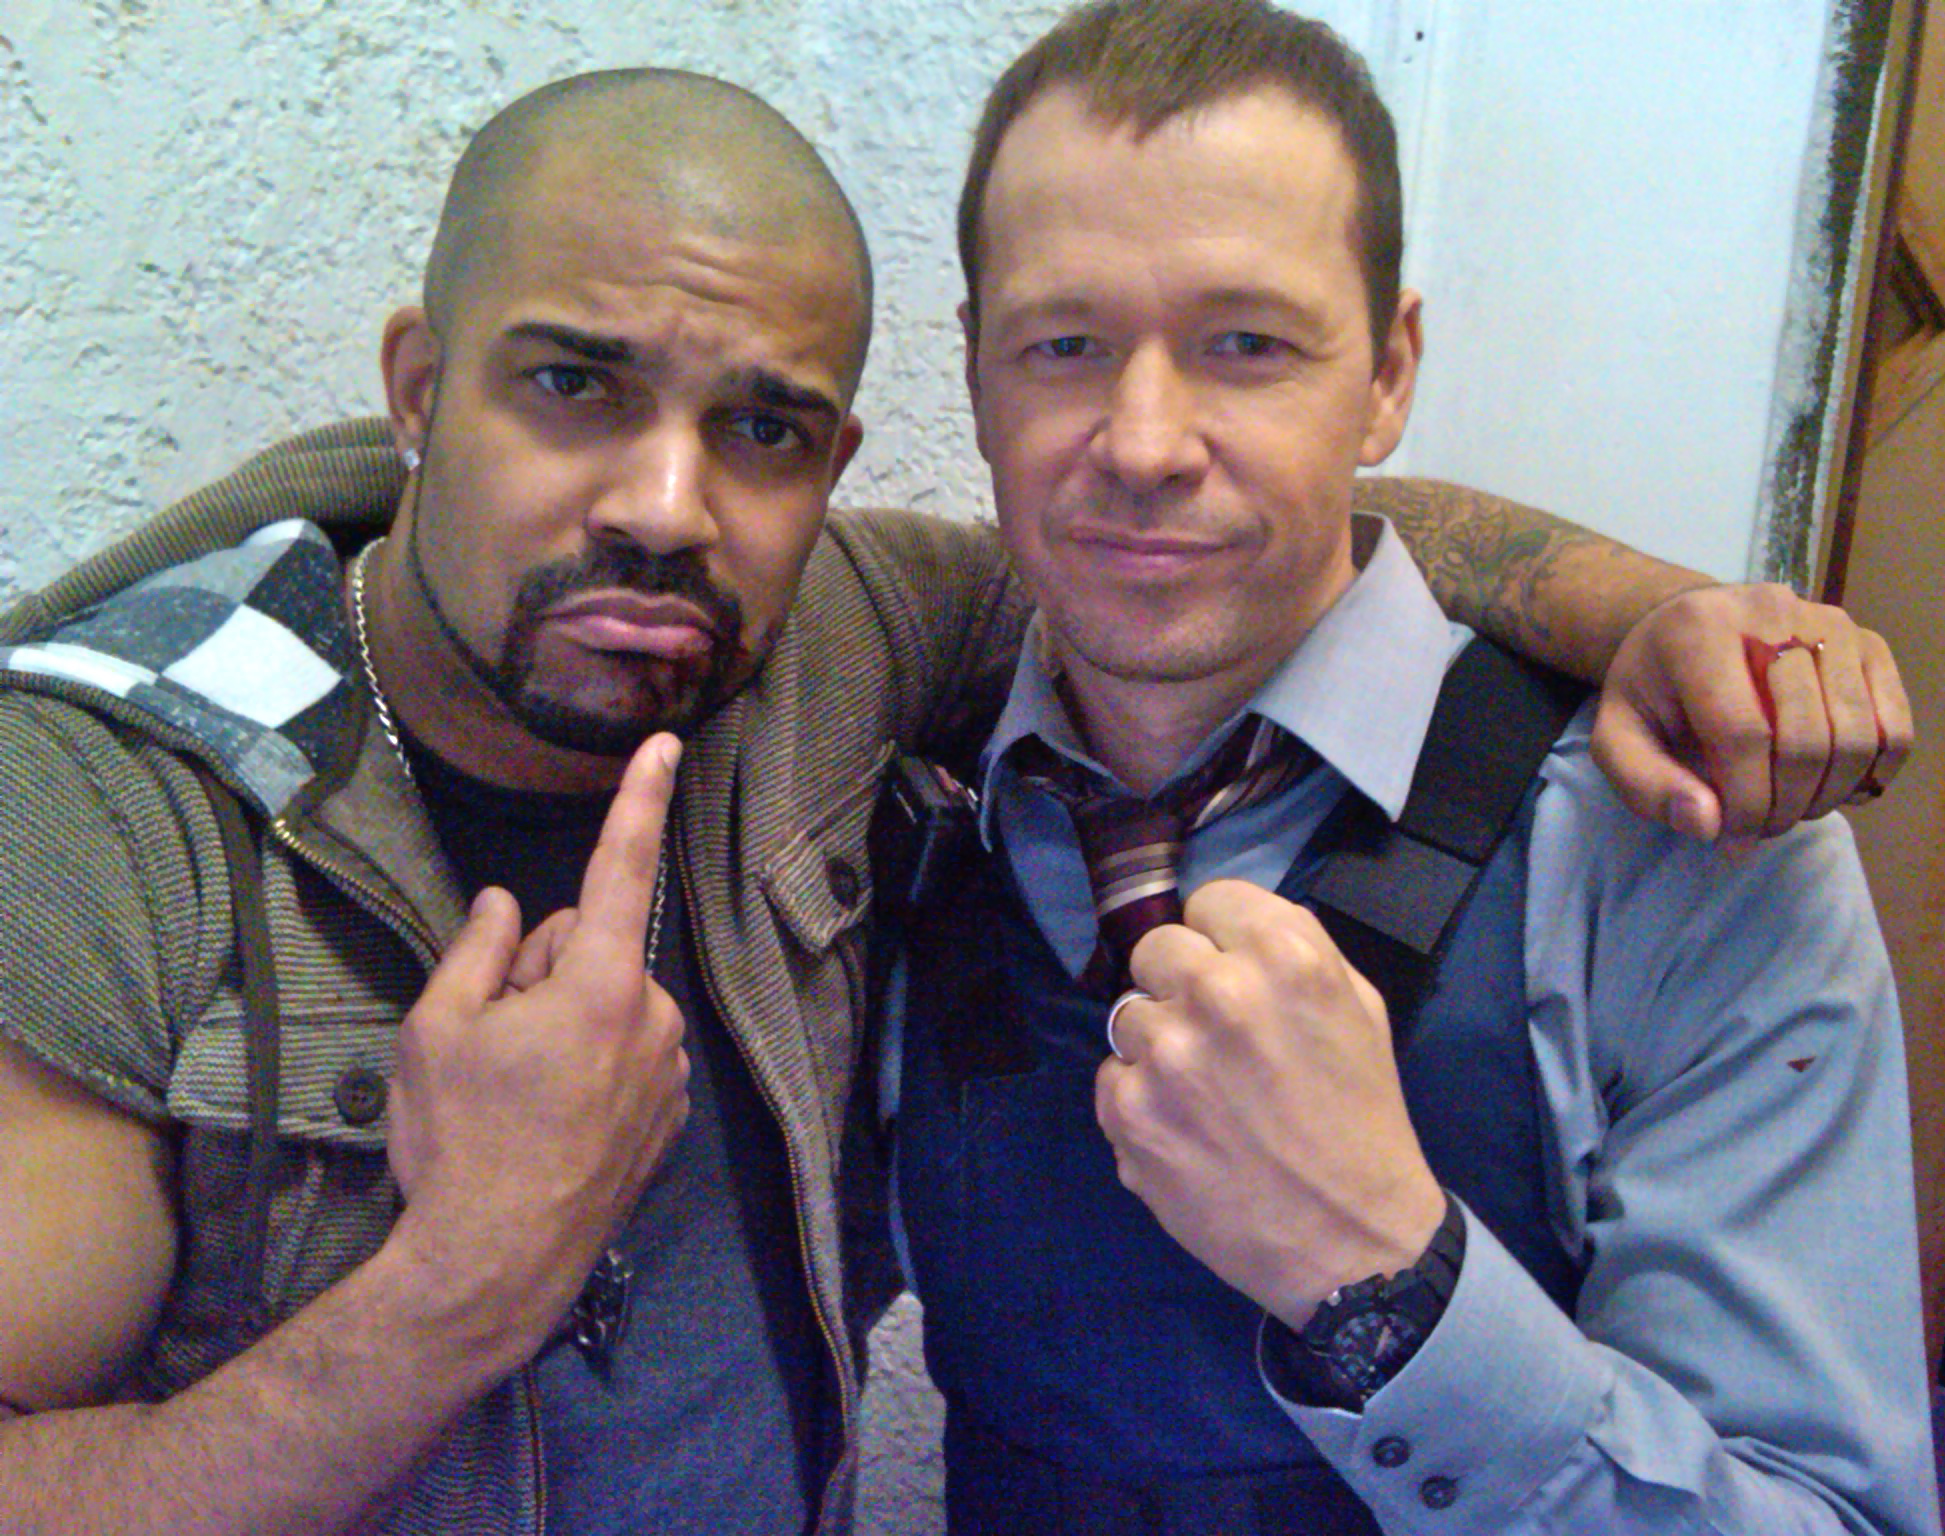 Jeremy Dash and Donnie Wahlberg on the set of Blue Bloods